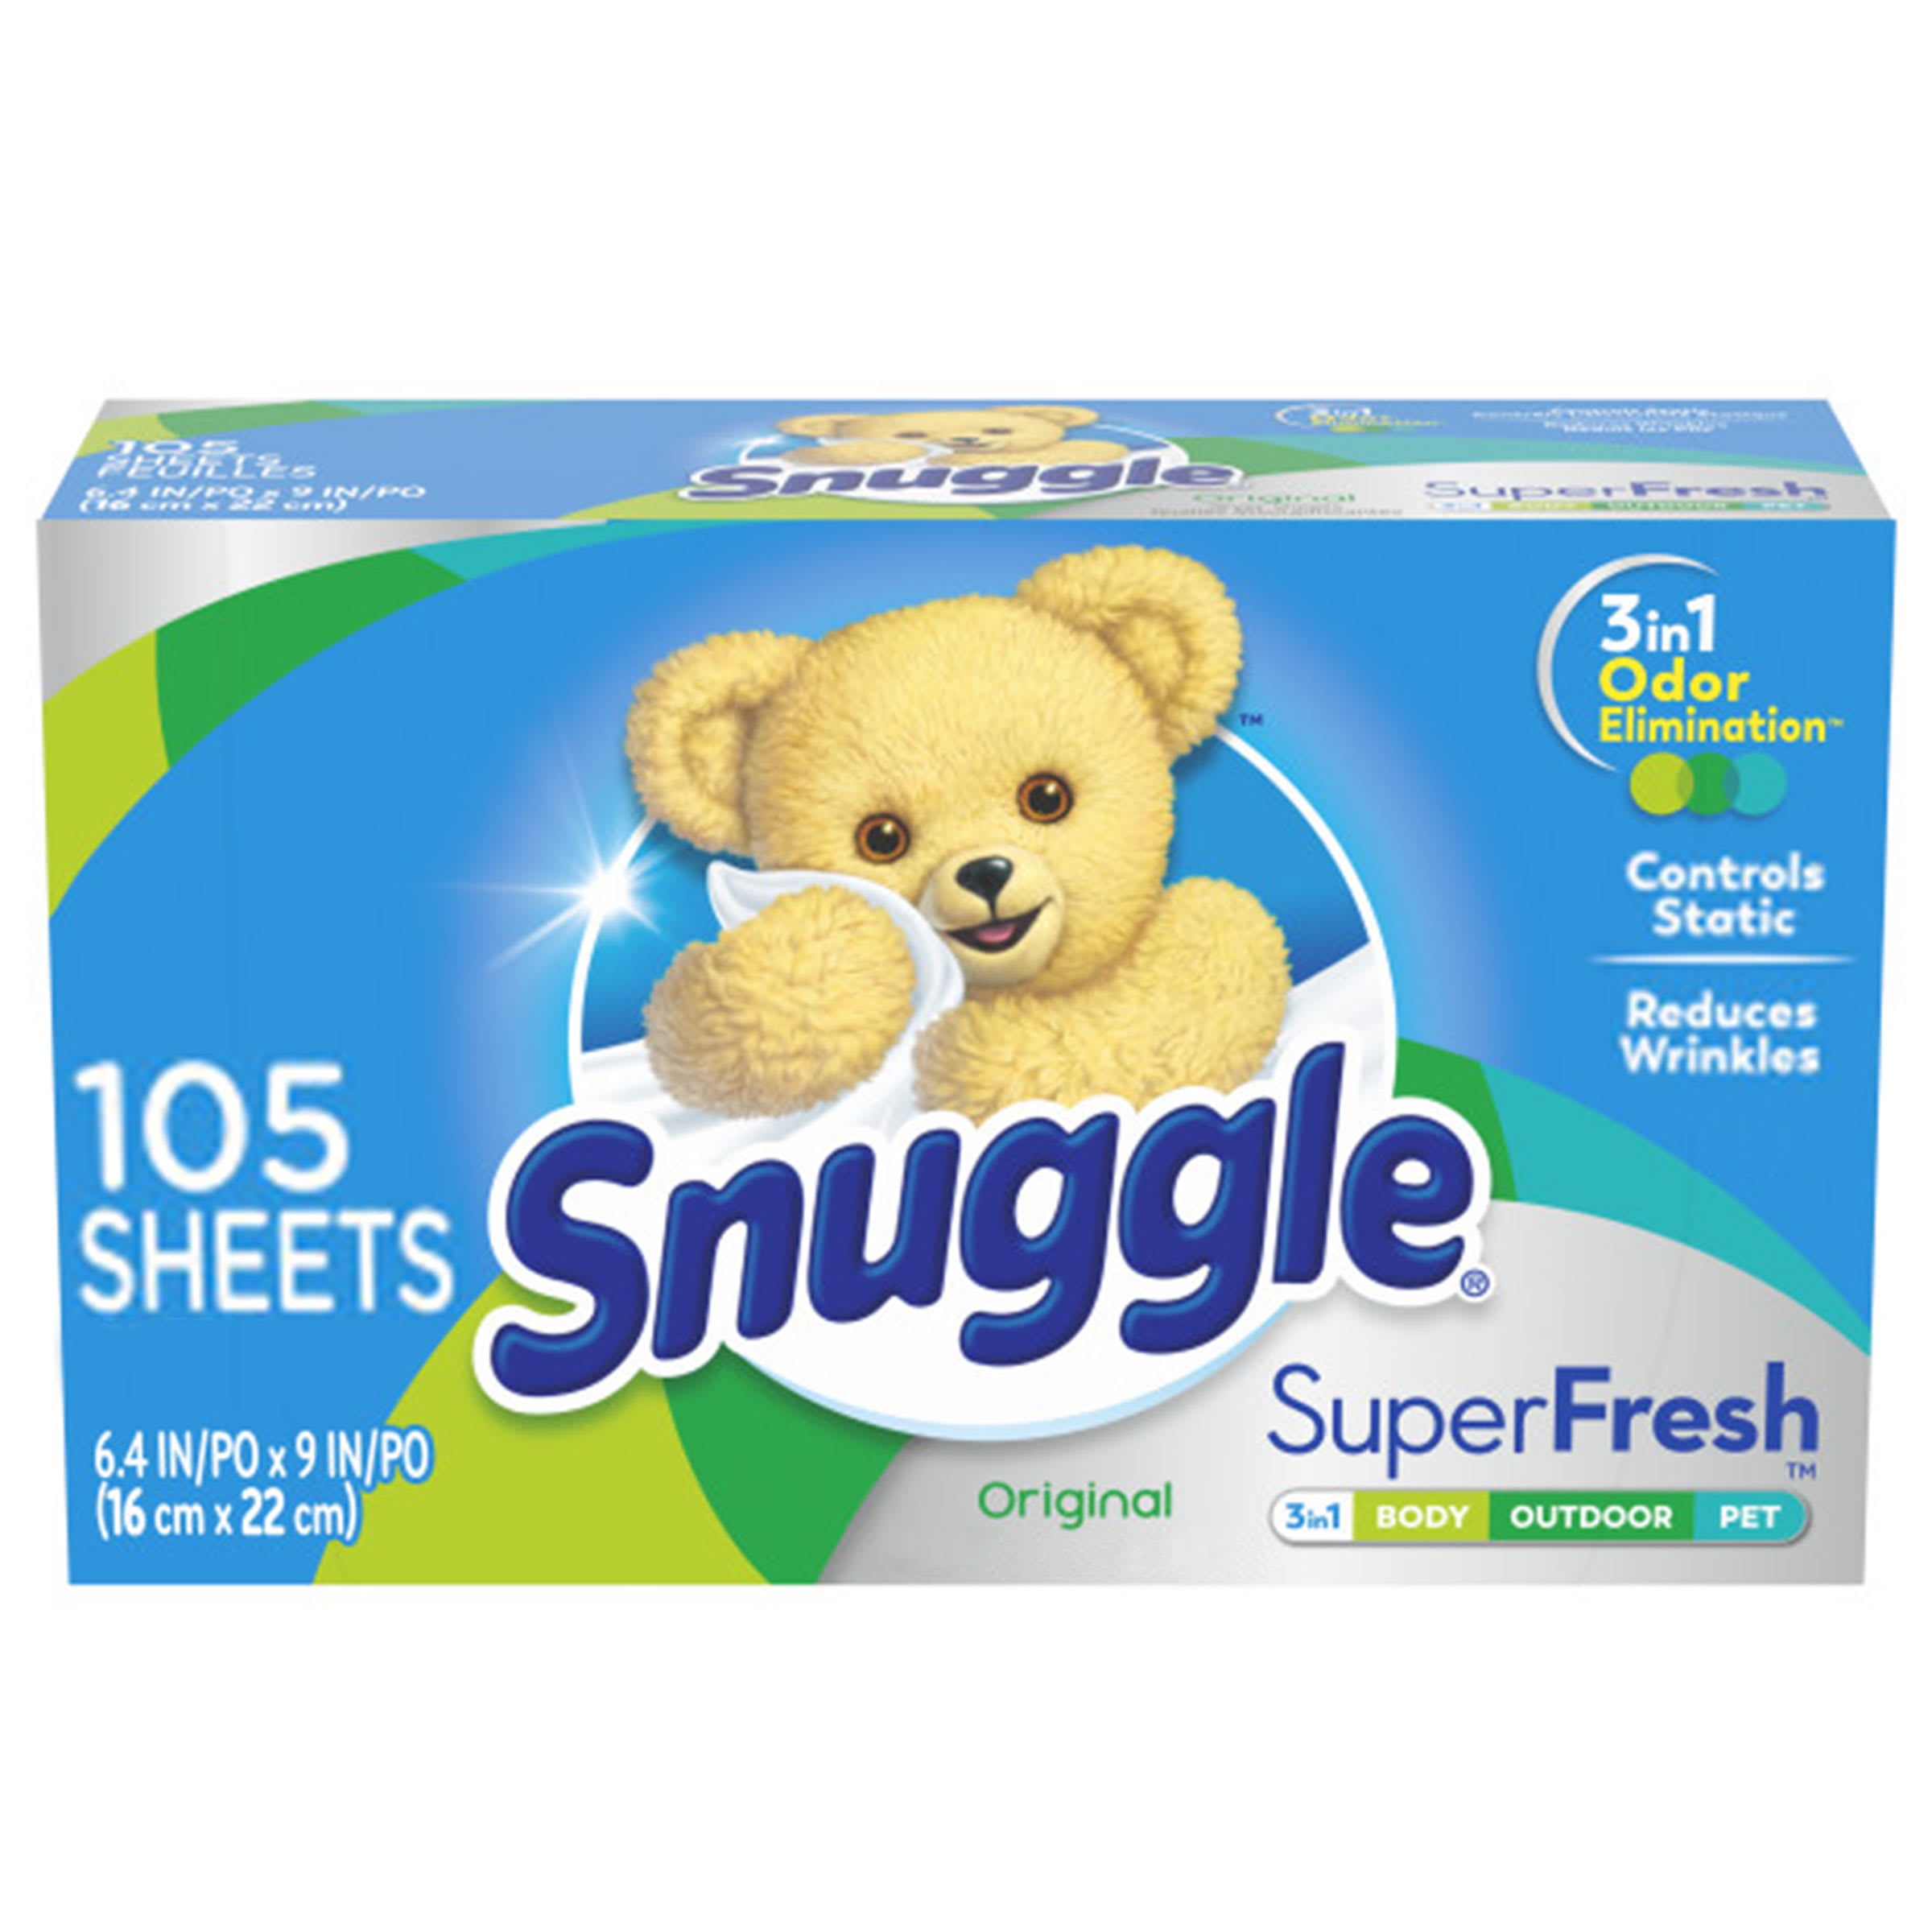 Snuggle SuperCare Fabric Softener Dryer Sheets 105 Sheets Lilies and Linen 